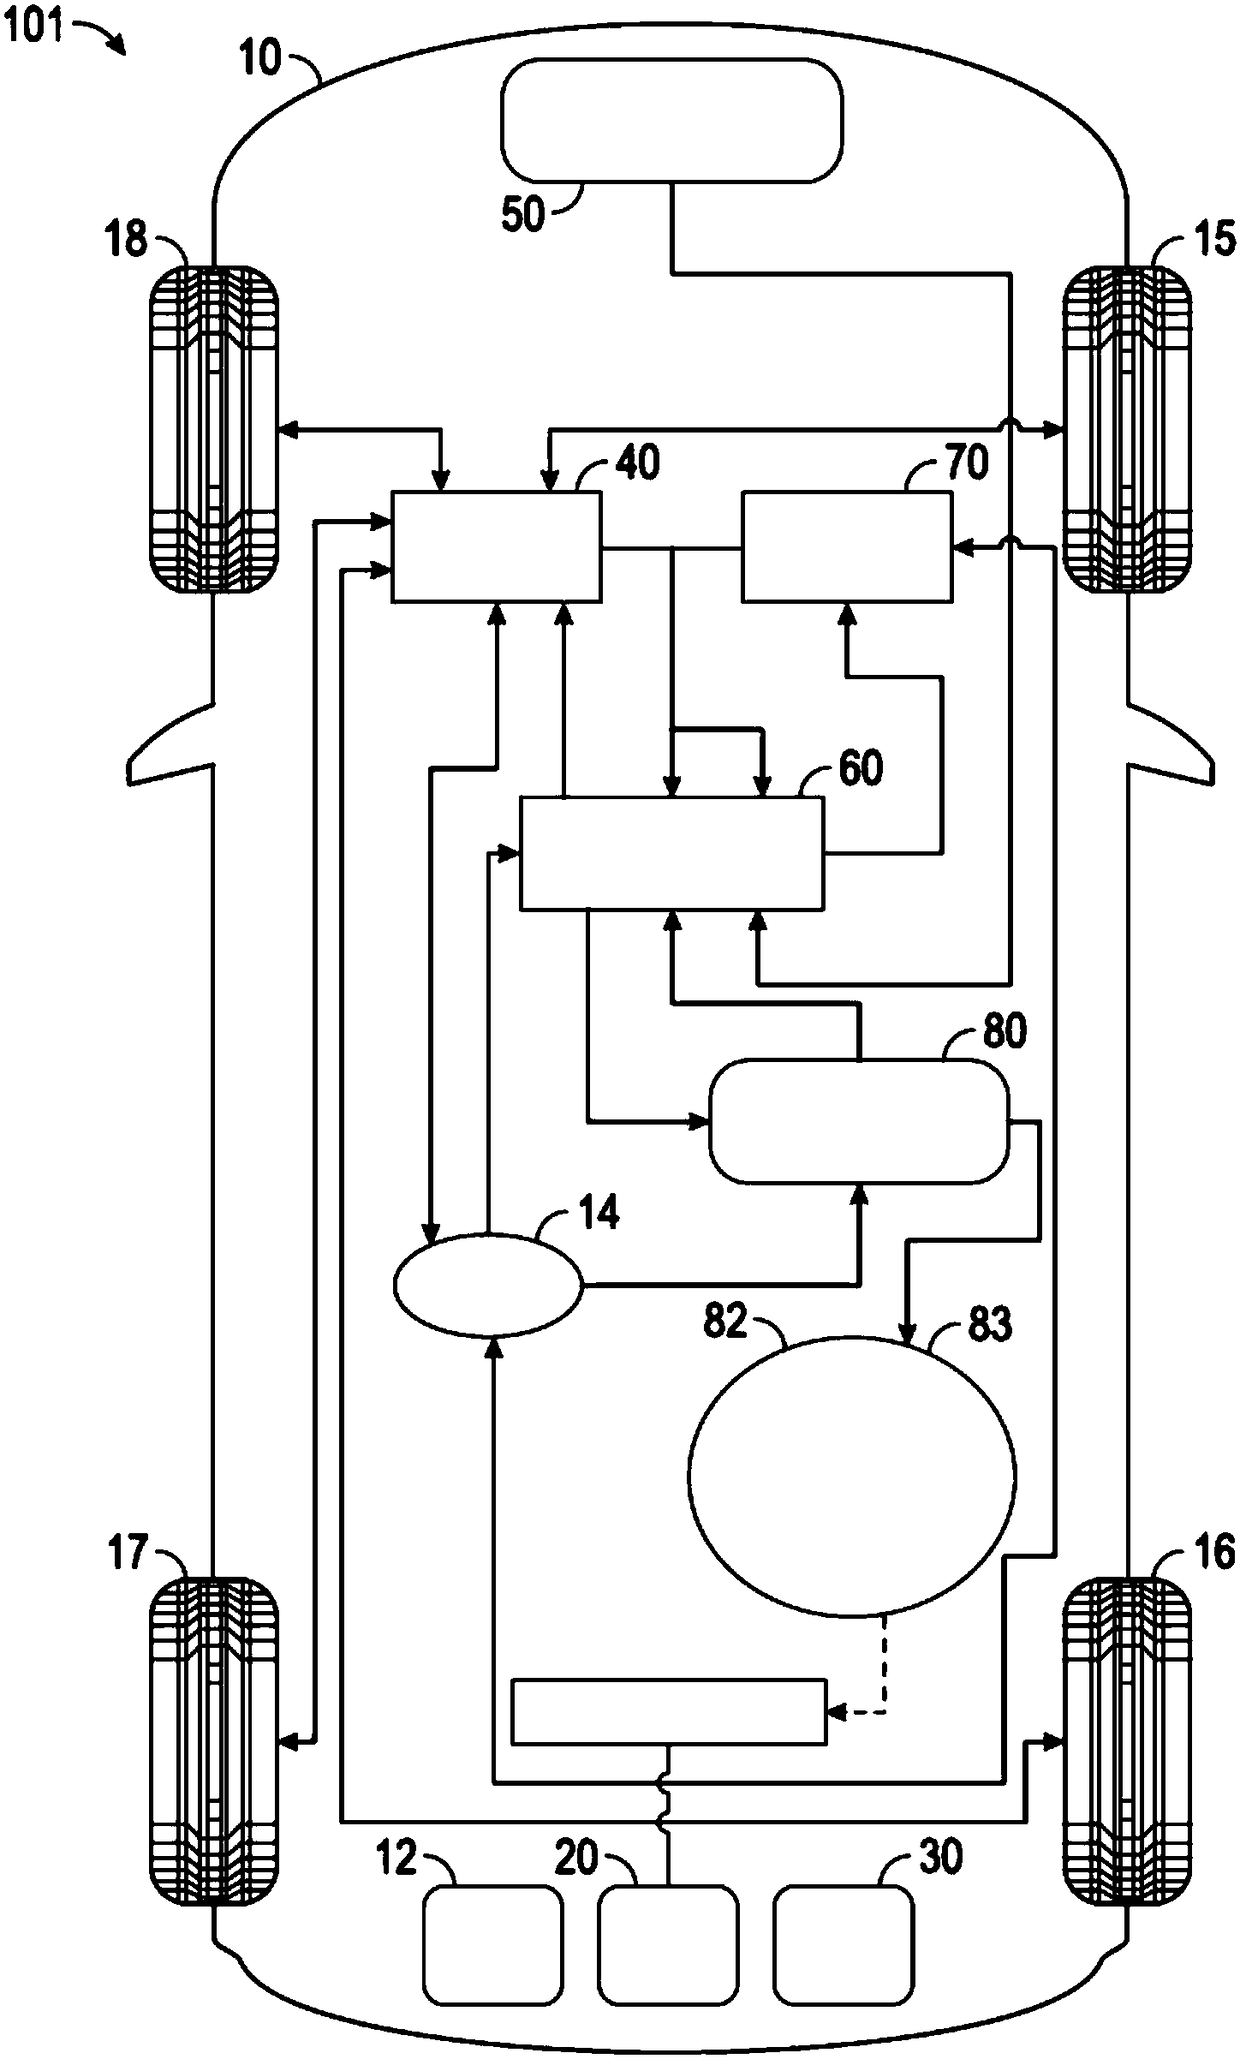 Methods and systems of actuating a clutch of a manual transmission during autonomous braking